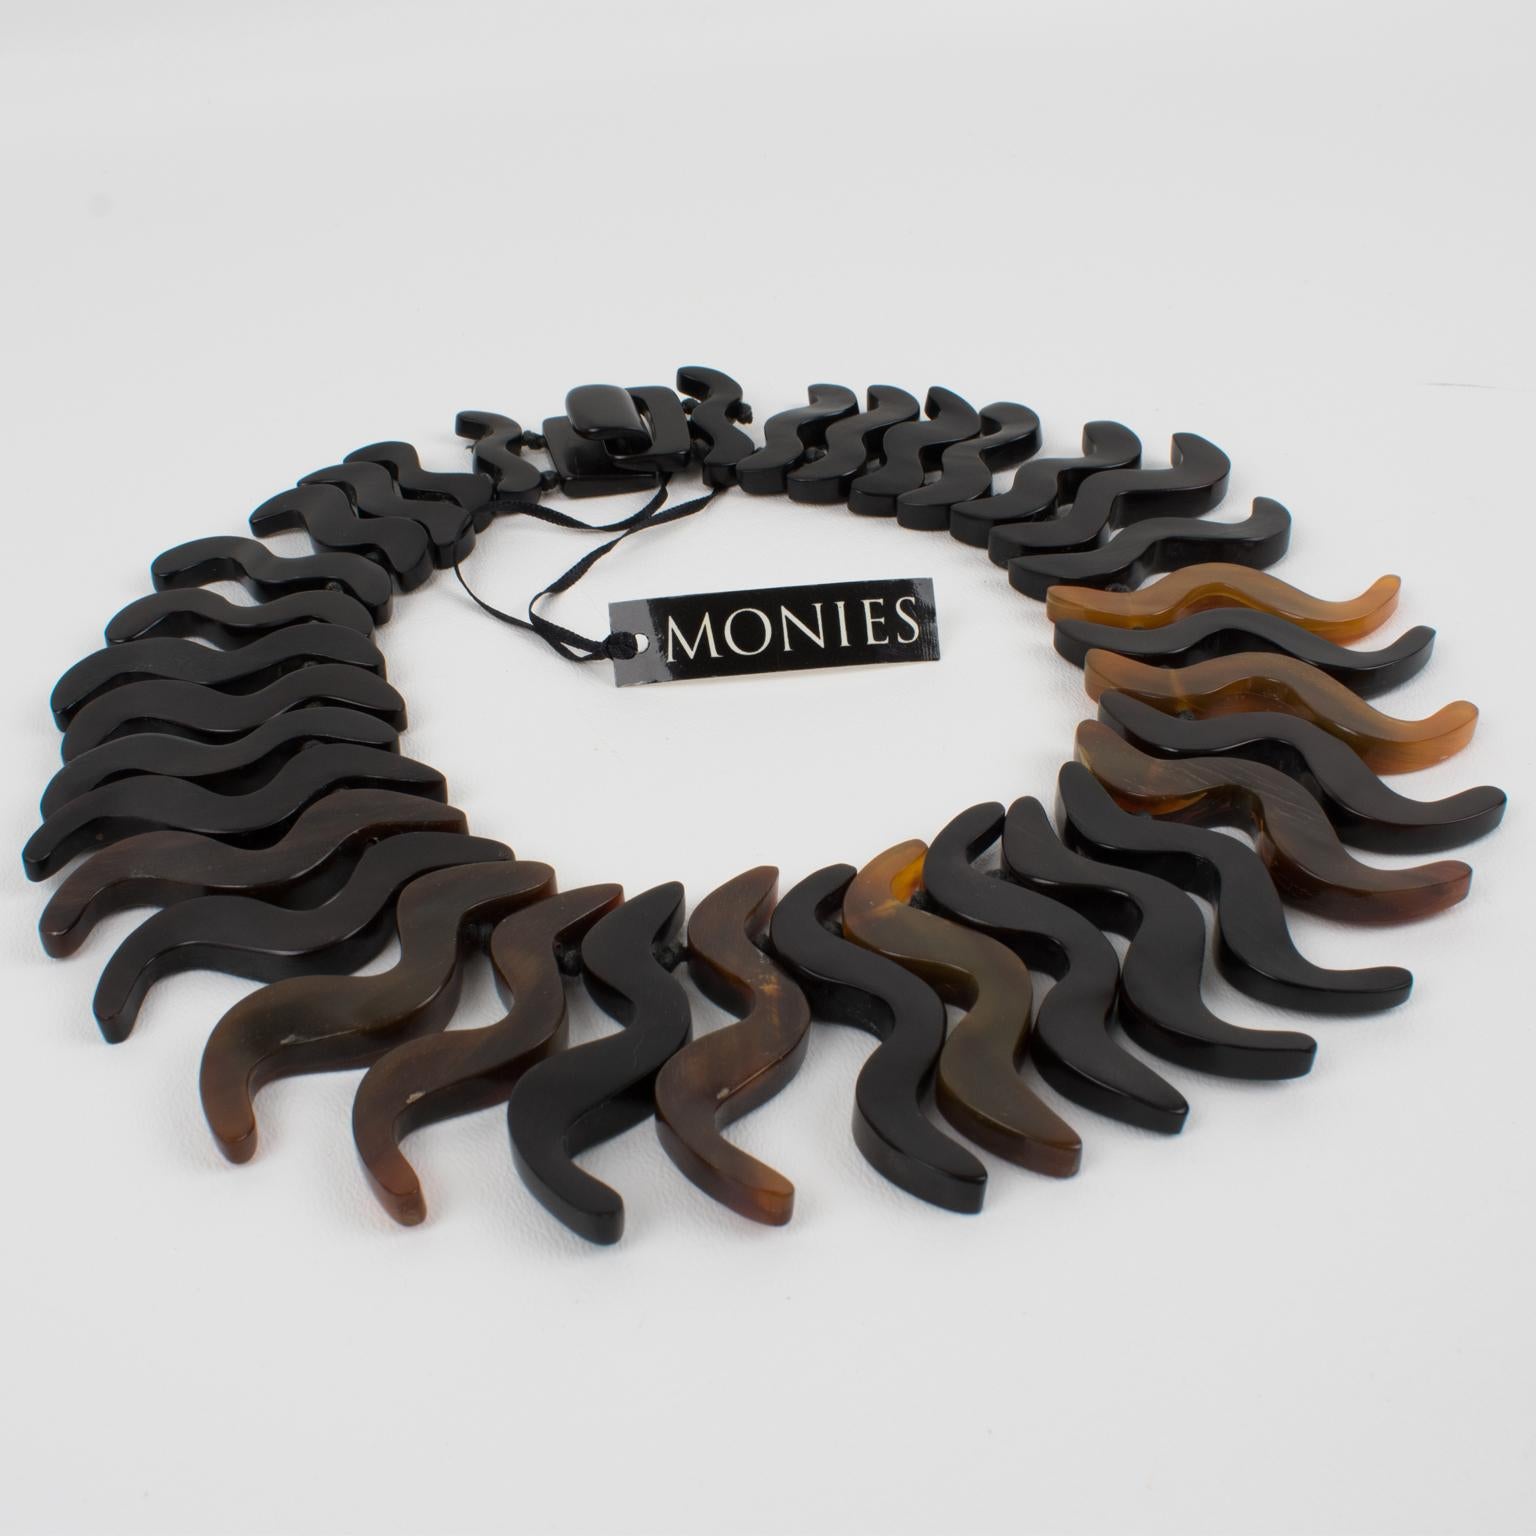 This gorgeous oversized resin necklace by Gerda Lyngaard for Monies features chunky hand-crafted zig-zag-shaped resin elements with carving and is treated to resemble faux-horn material. The choker has a black resin closure clasp. The organic and